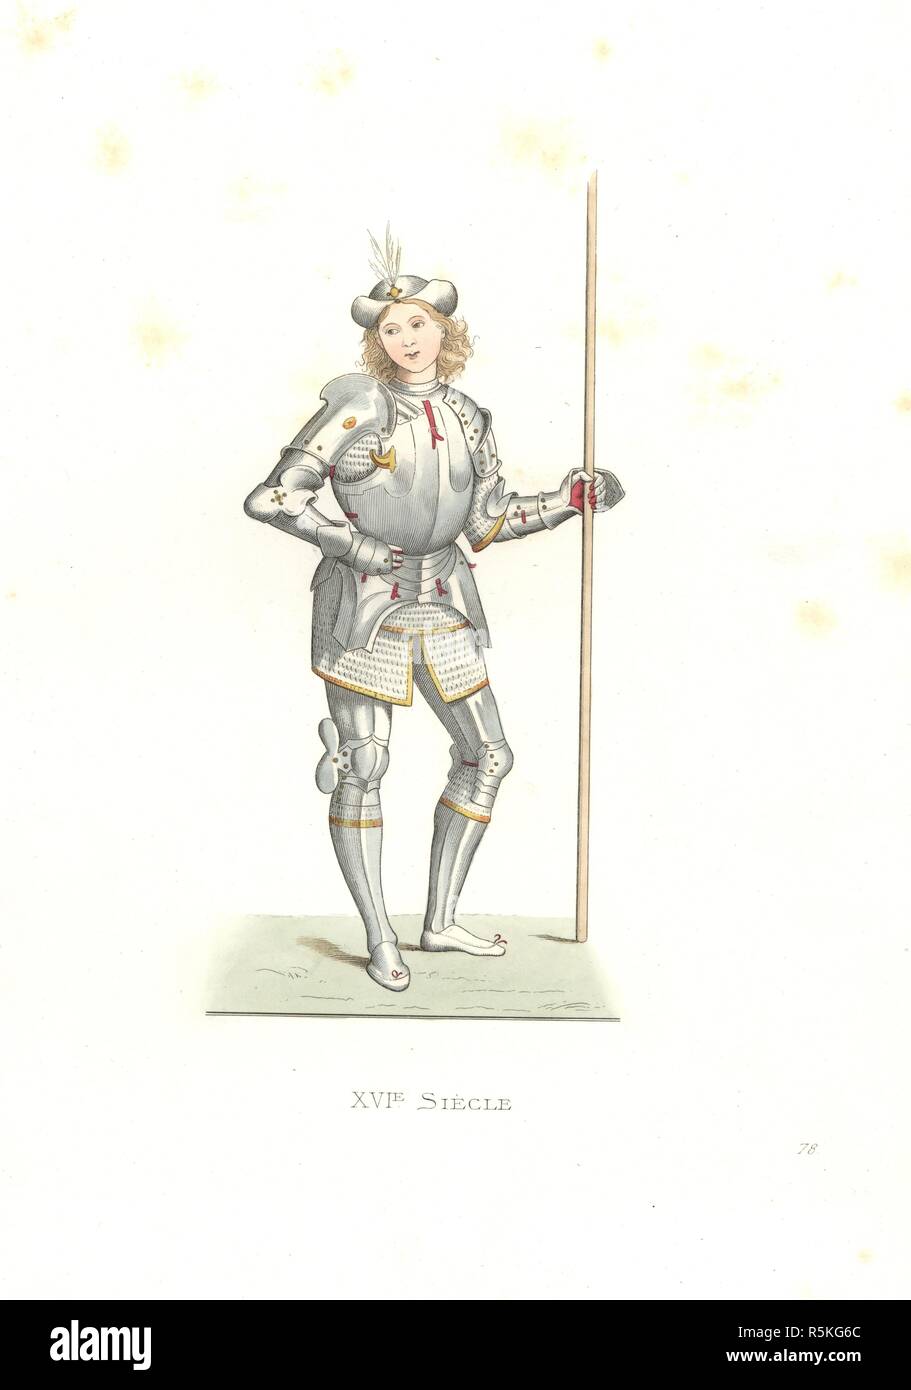 Italian man of arms, 16th century, after an illustration by Italian artist Bernardino di Benedetto, il Pinturicchio (1454-1513), in the Louvre. Handcolored illustration by E. Lechevallier-Chevignard, lithographed by A. Didier, L. Flameng, F. Laguillermie, from Georges Duplessis's 'Costumes historiques des XVIe, XVIIe et XVIIIe siecles' (Historical costumes of the 16th, 17th and 18th centuries), Paris 1867. The book was a continuation of the series on the costumes of the 12th to 15th centuries published by Camille Bonnard and Paul Mercuri from 1830. Georges Duplessis (1834-1899) was curator of  Stock Photo